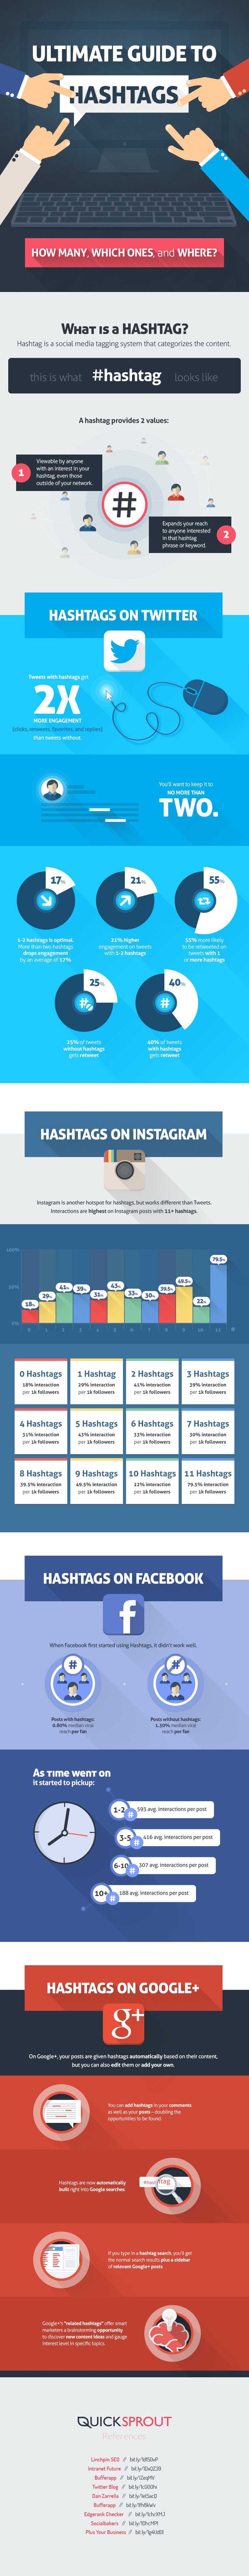 ultimate-guide-to-social-media-hashtags-infographic